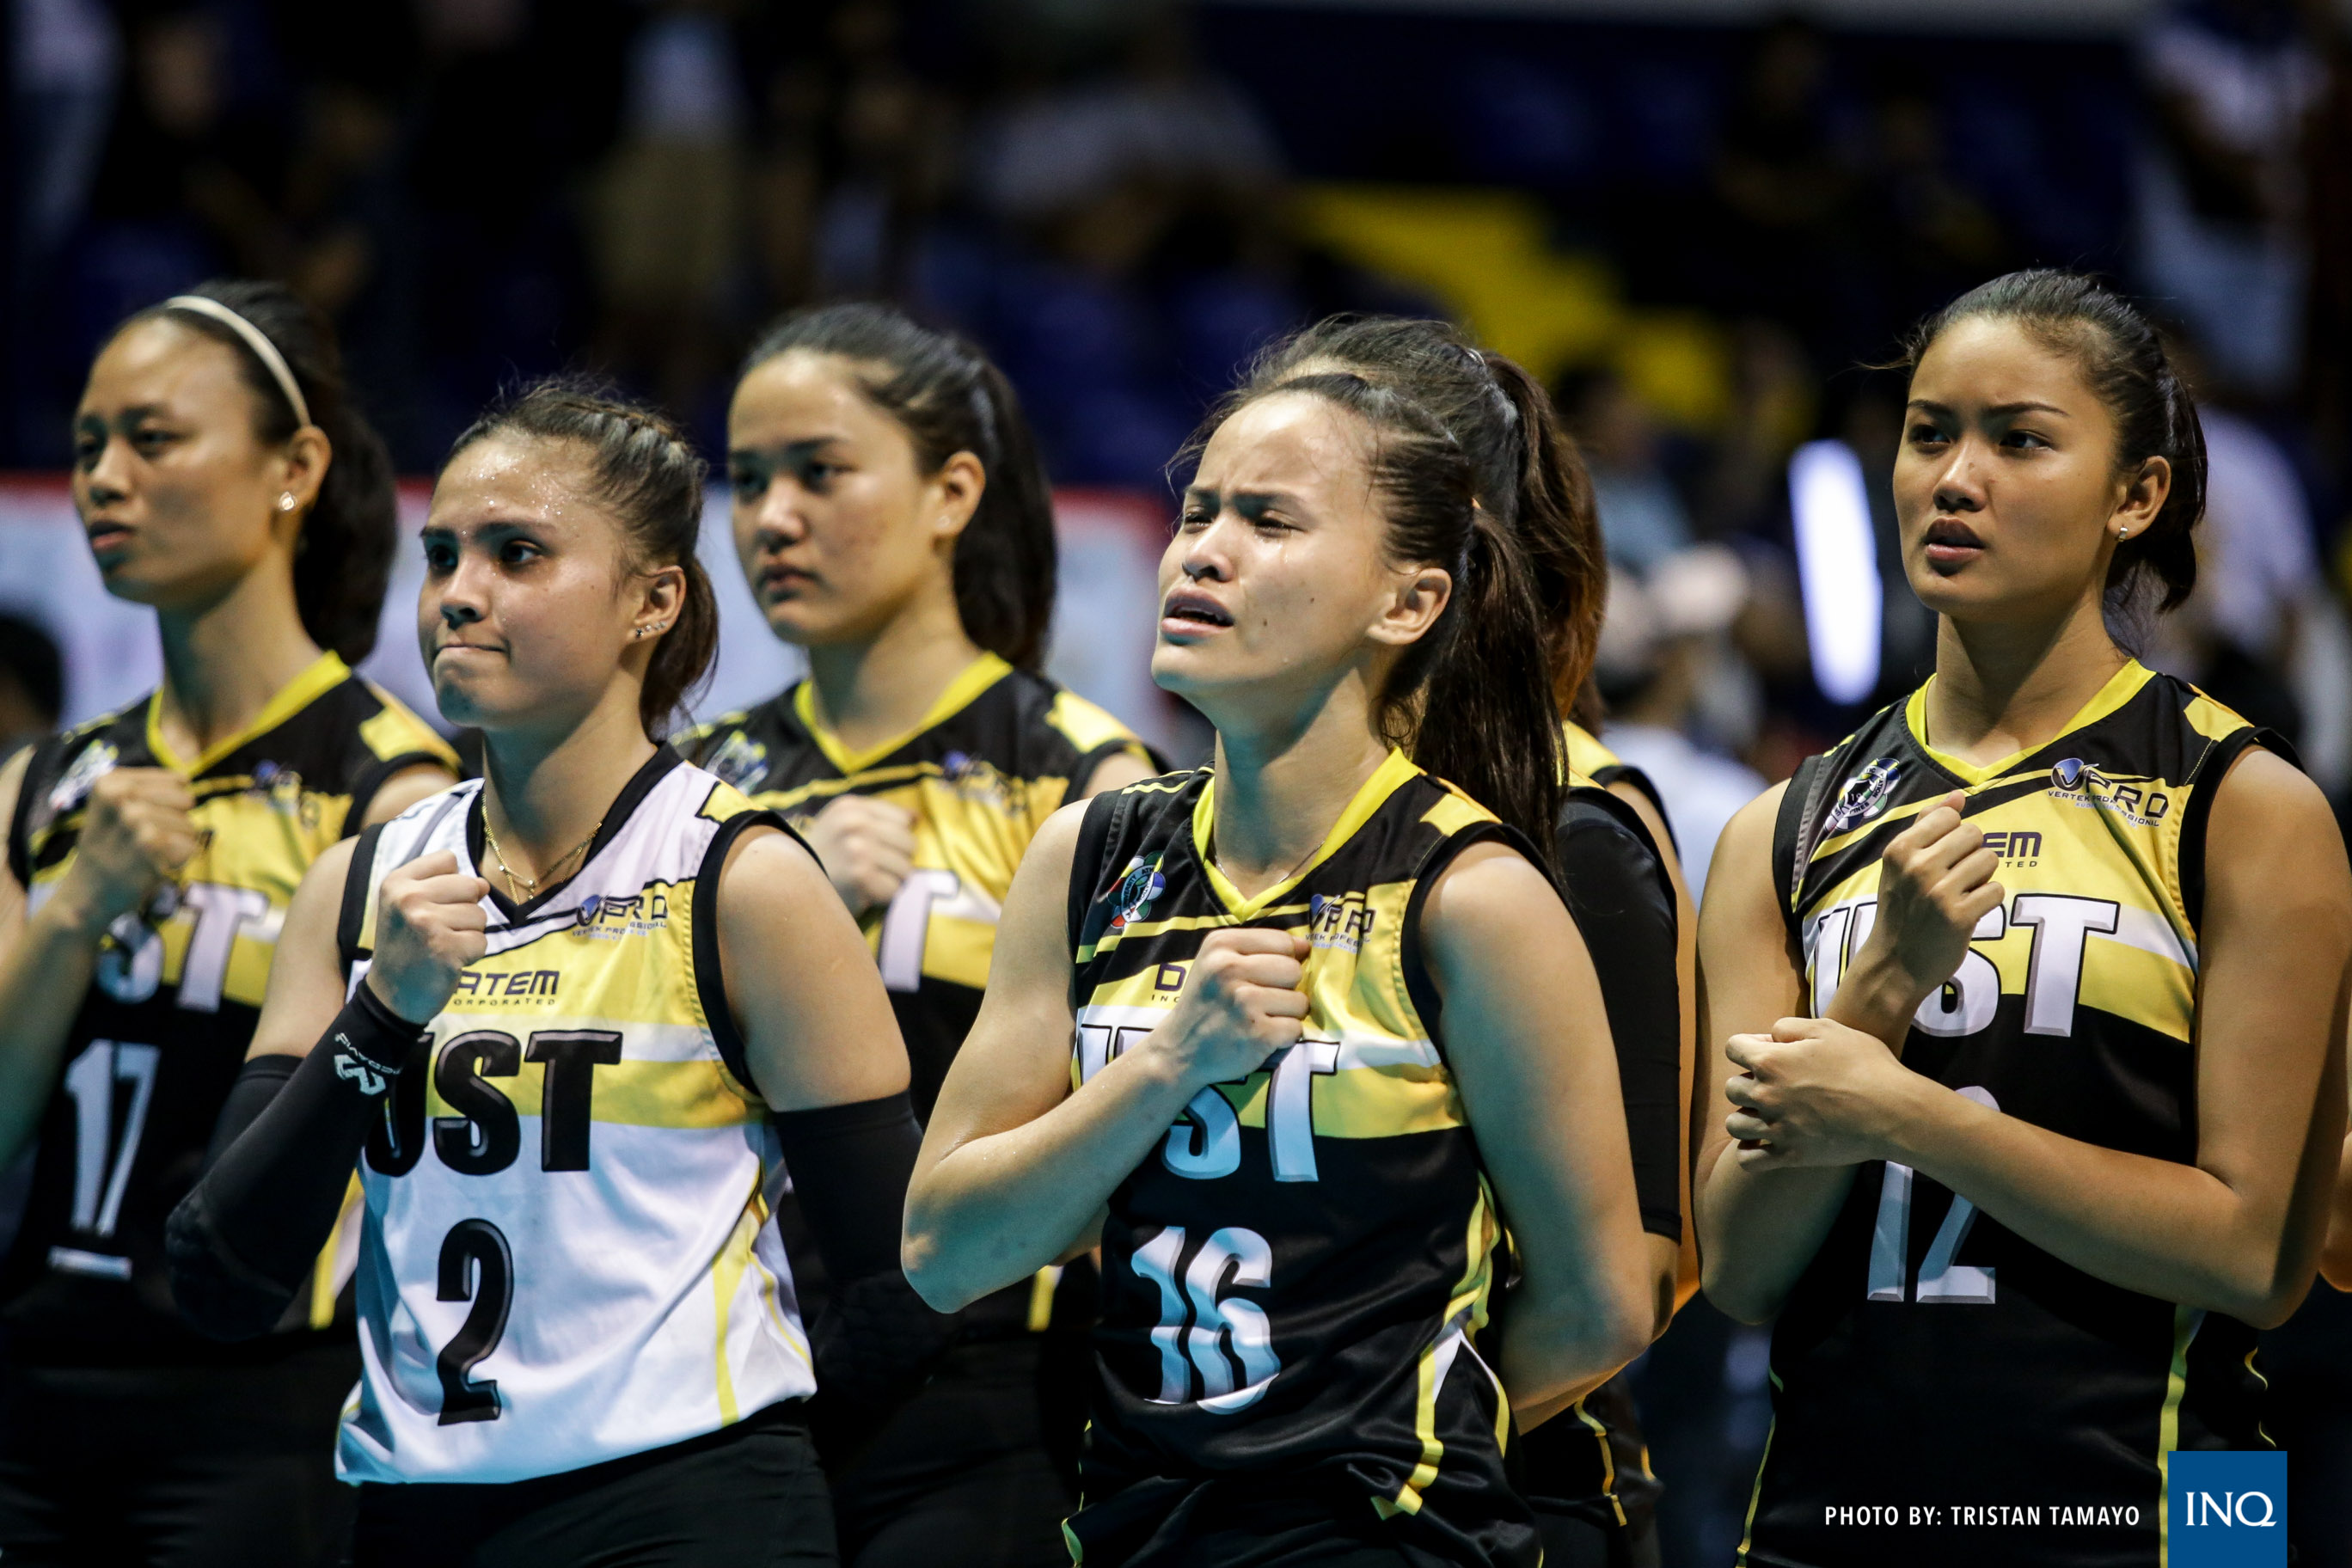 Expect a more explosive Cherry Rondina in her final year for UST